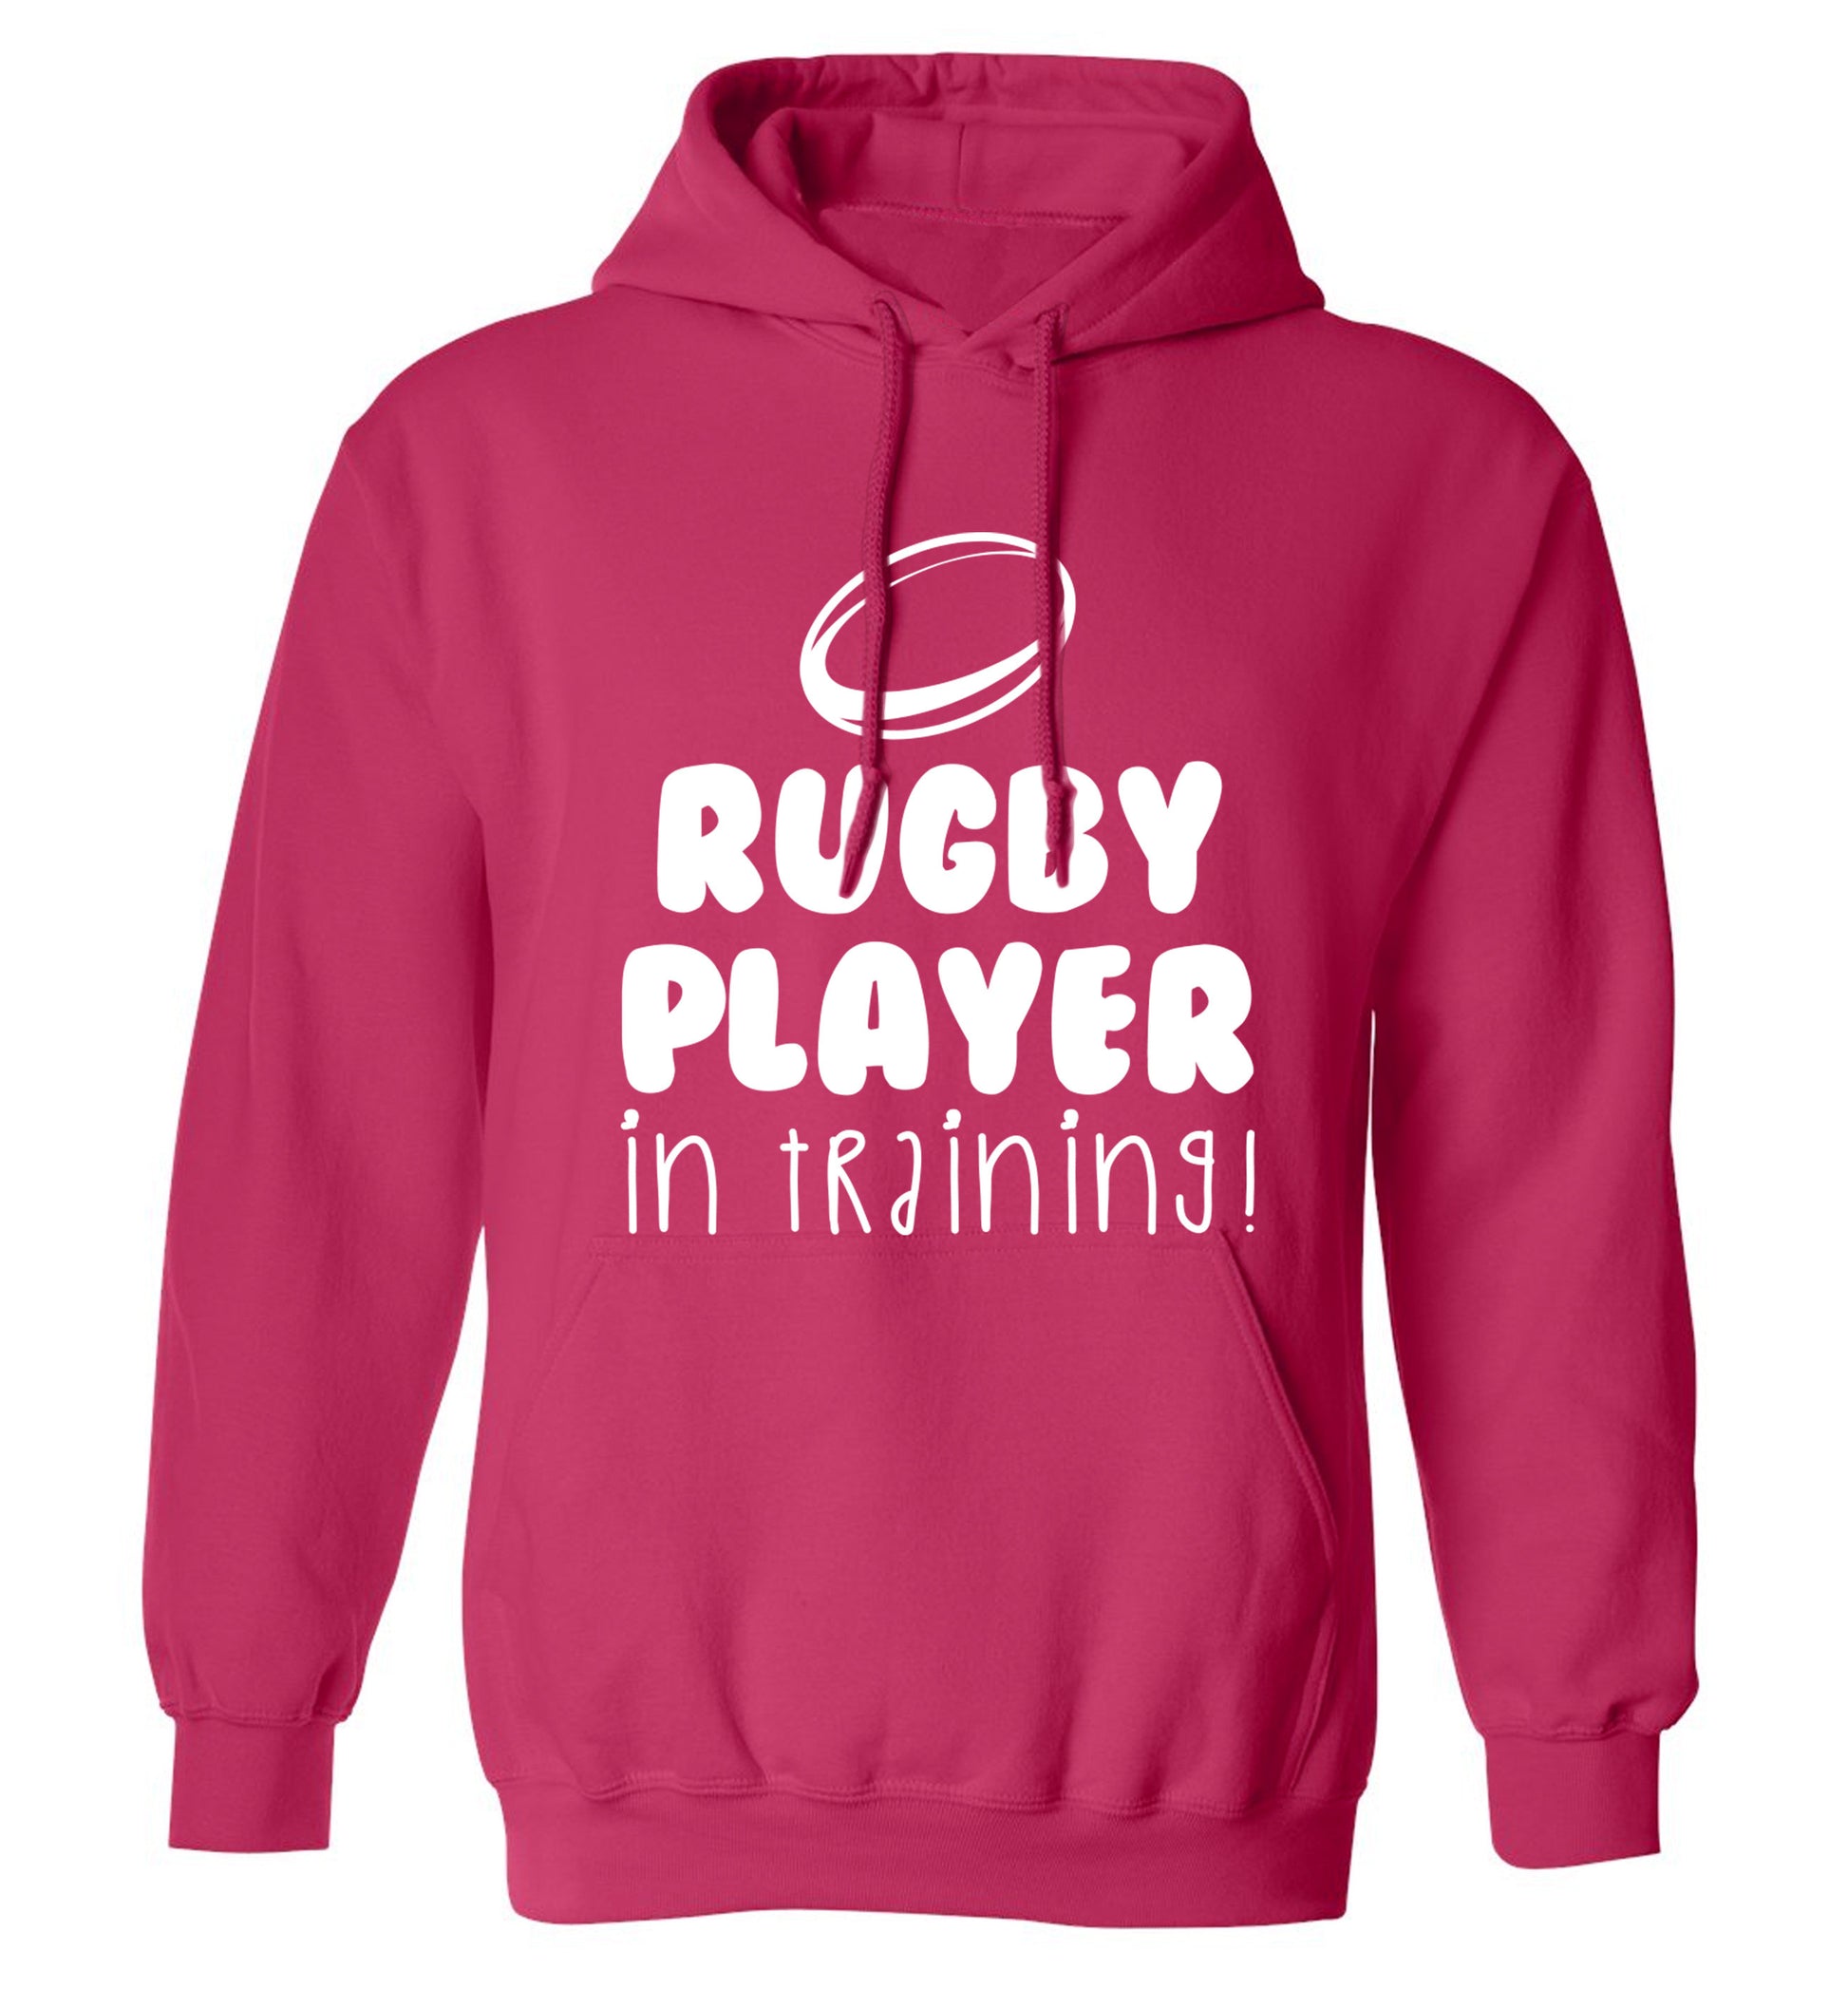 Rugby player in training adults unisex pink hoodie 2XL